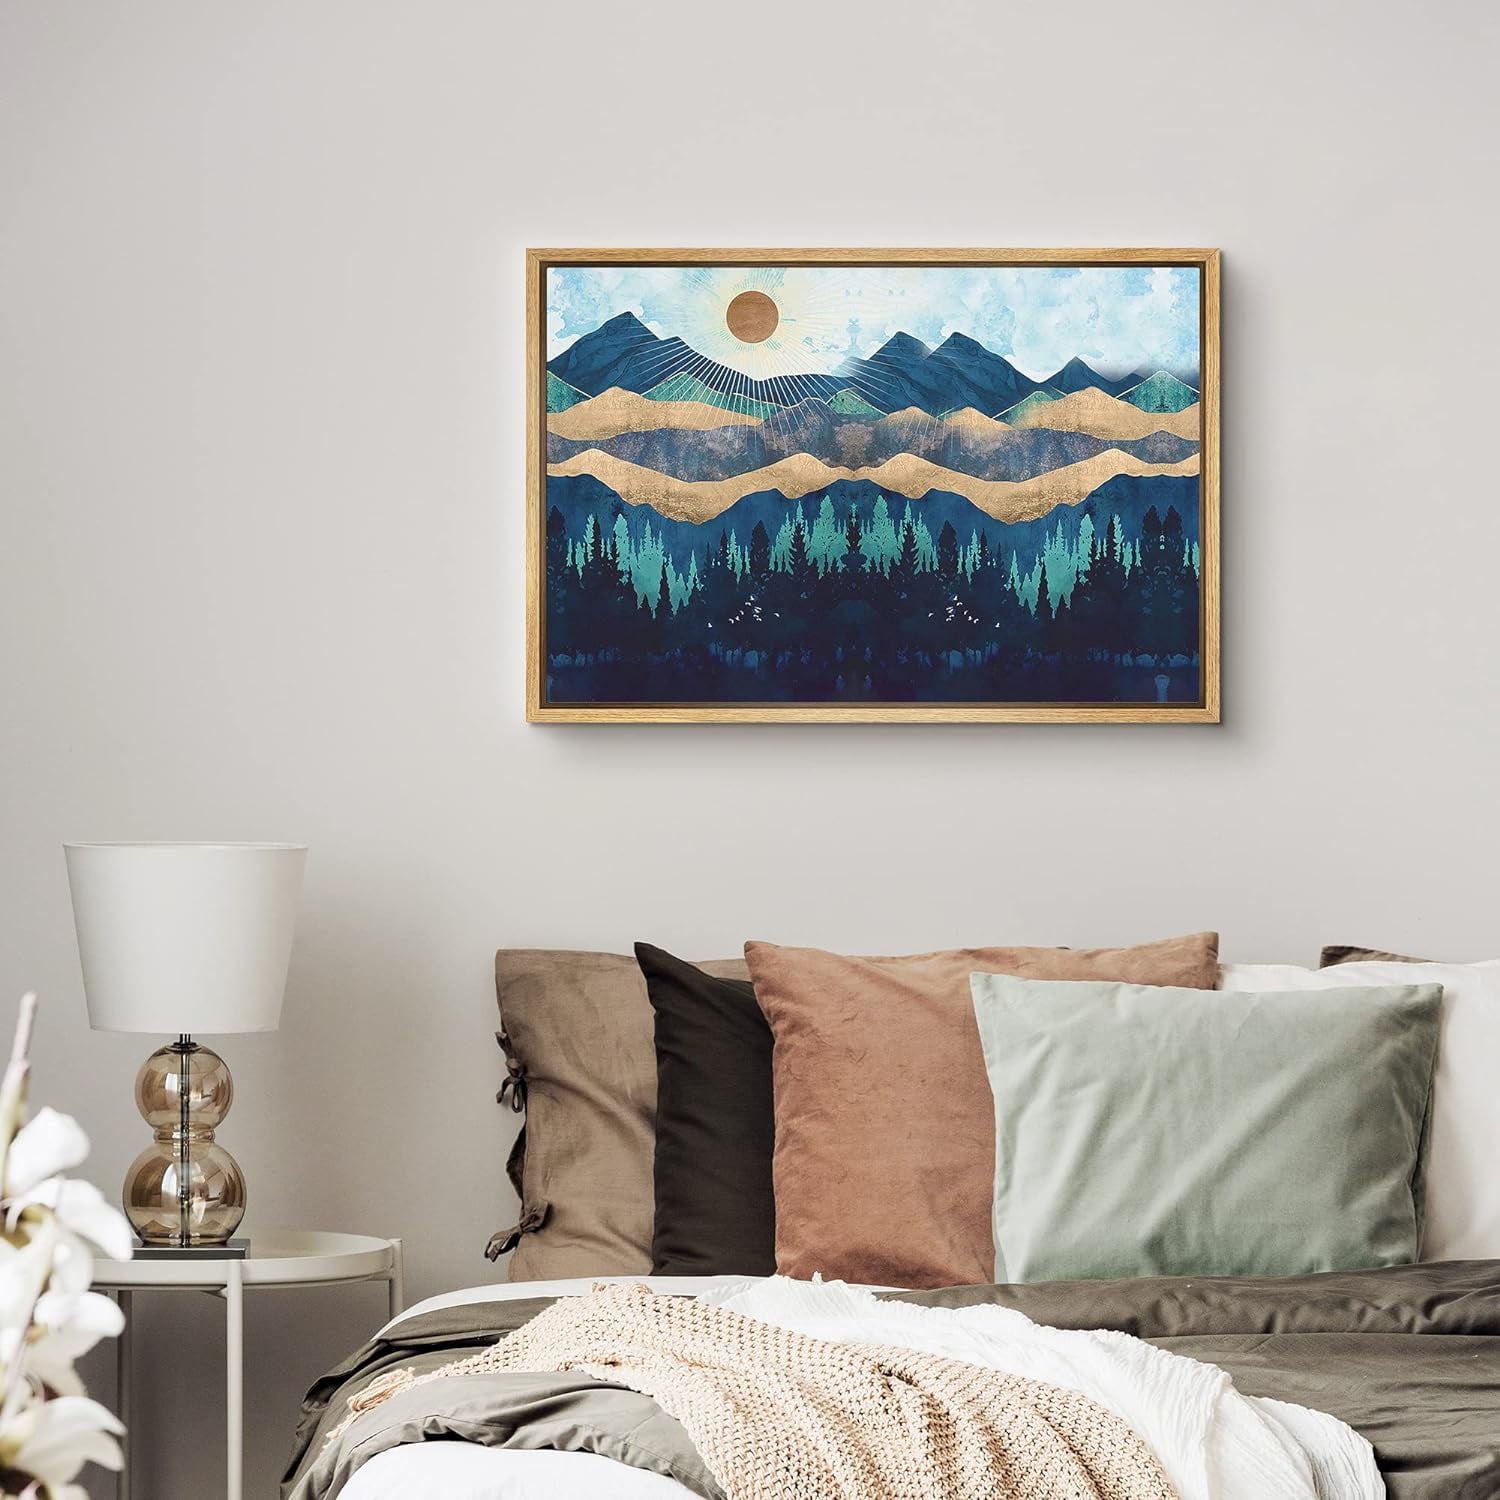 wall26 Framed Canvas Home Artwork Decoration Abstract Mountain Nature  Scenery Canvas Wall Art for Living Room, Bedroom 24x36 inches 